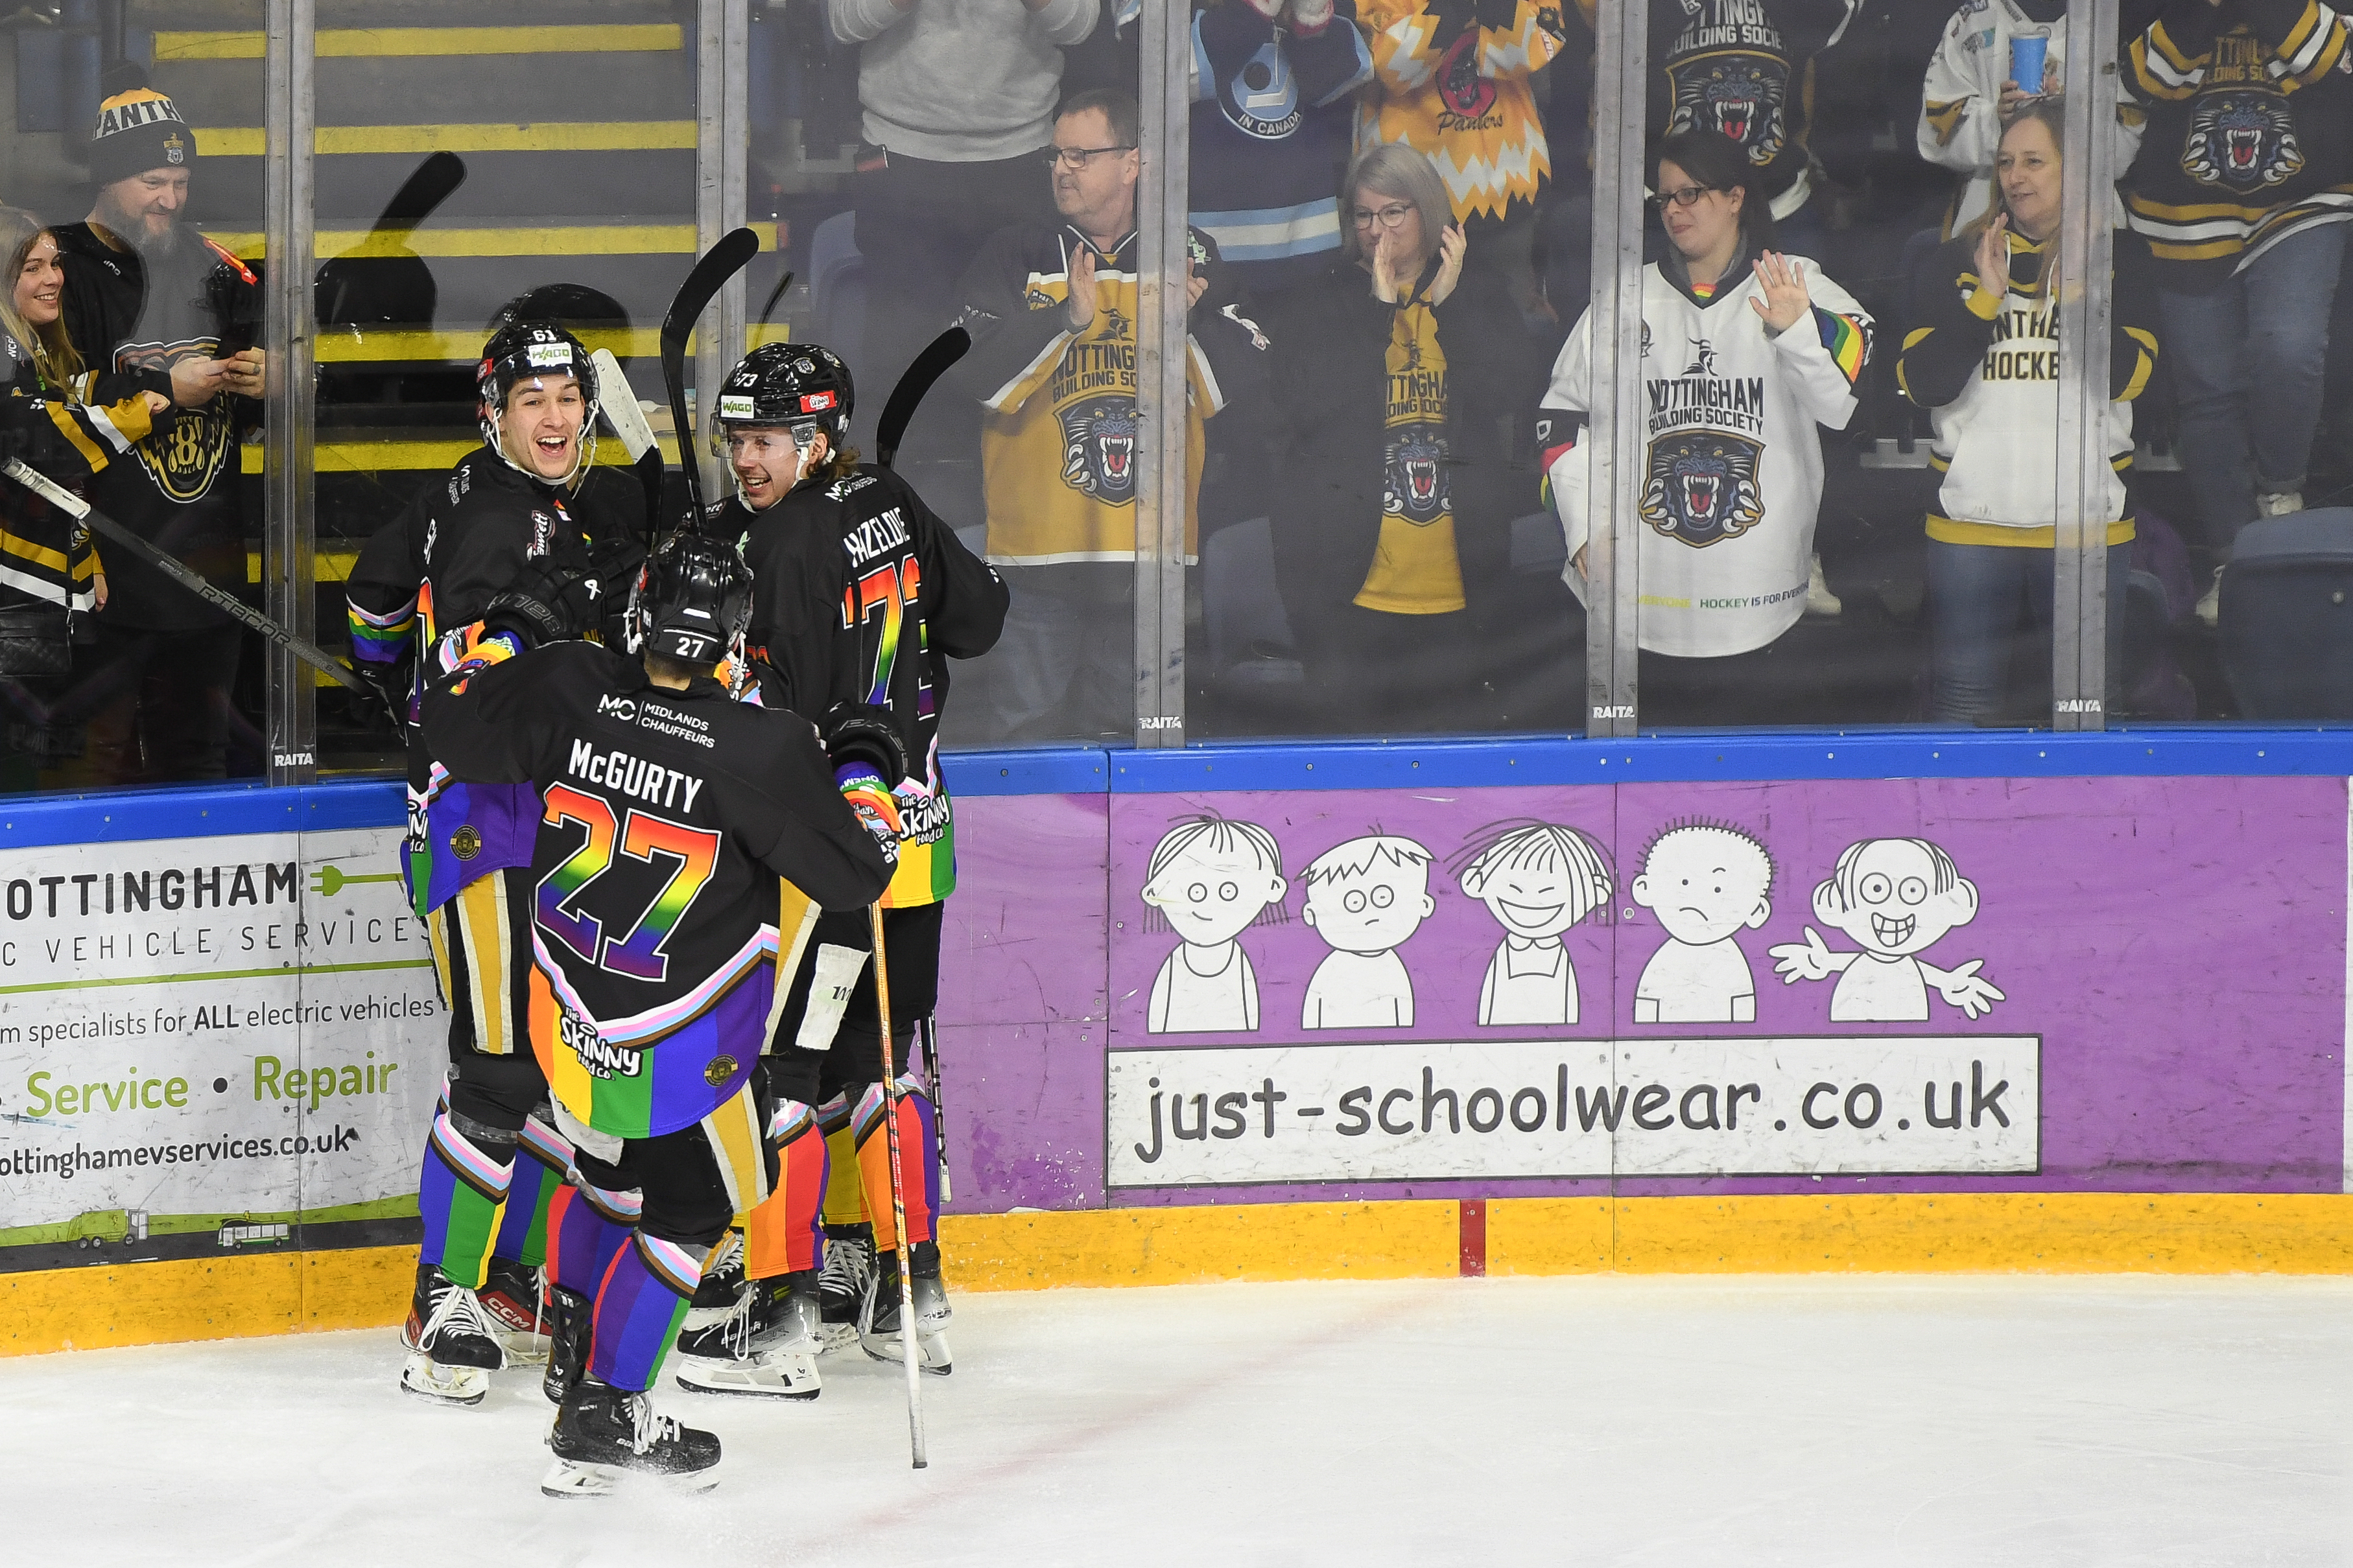 IT'S GAMEDAY IN NOTTINGHAM AS PANTHERS HOST CLAN Top Image